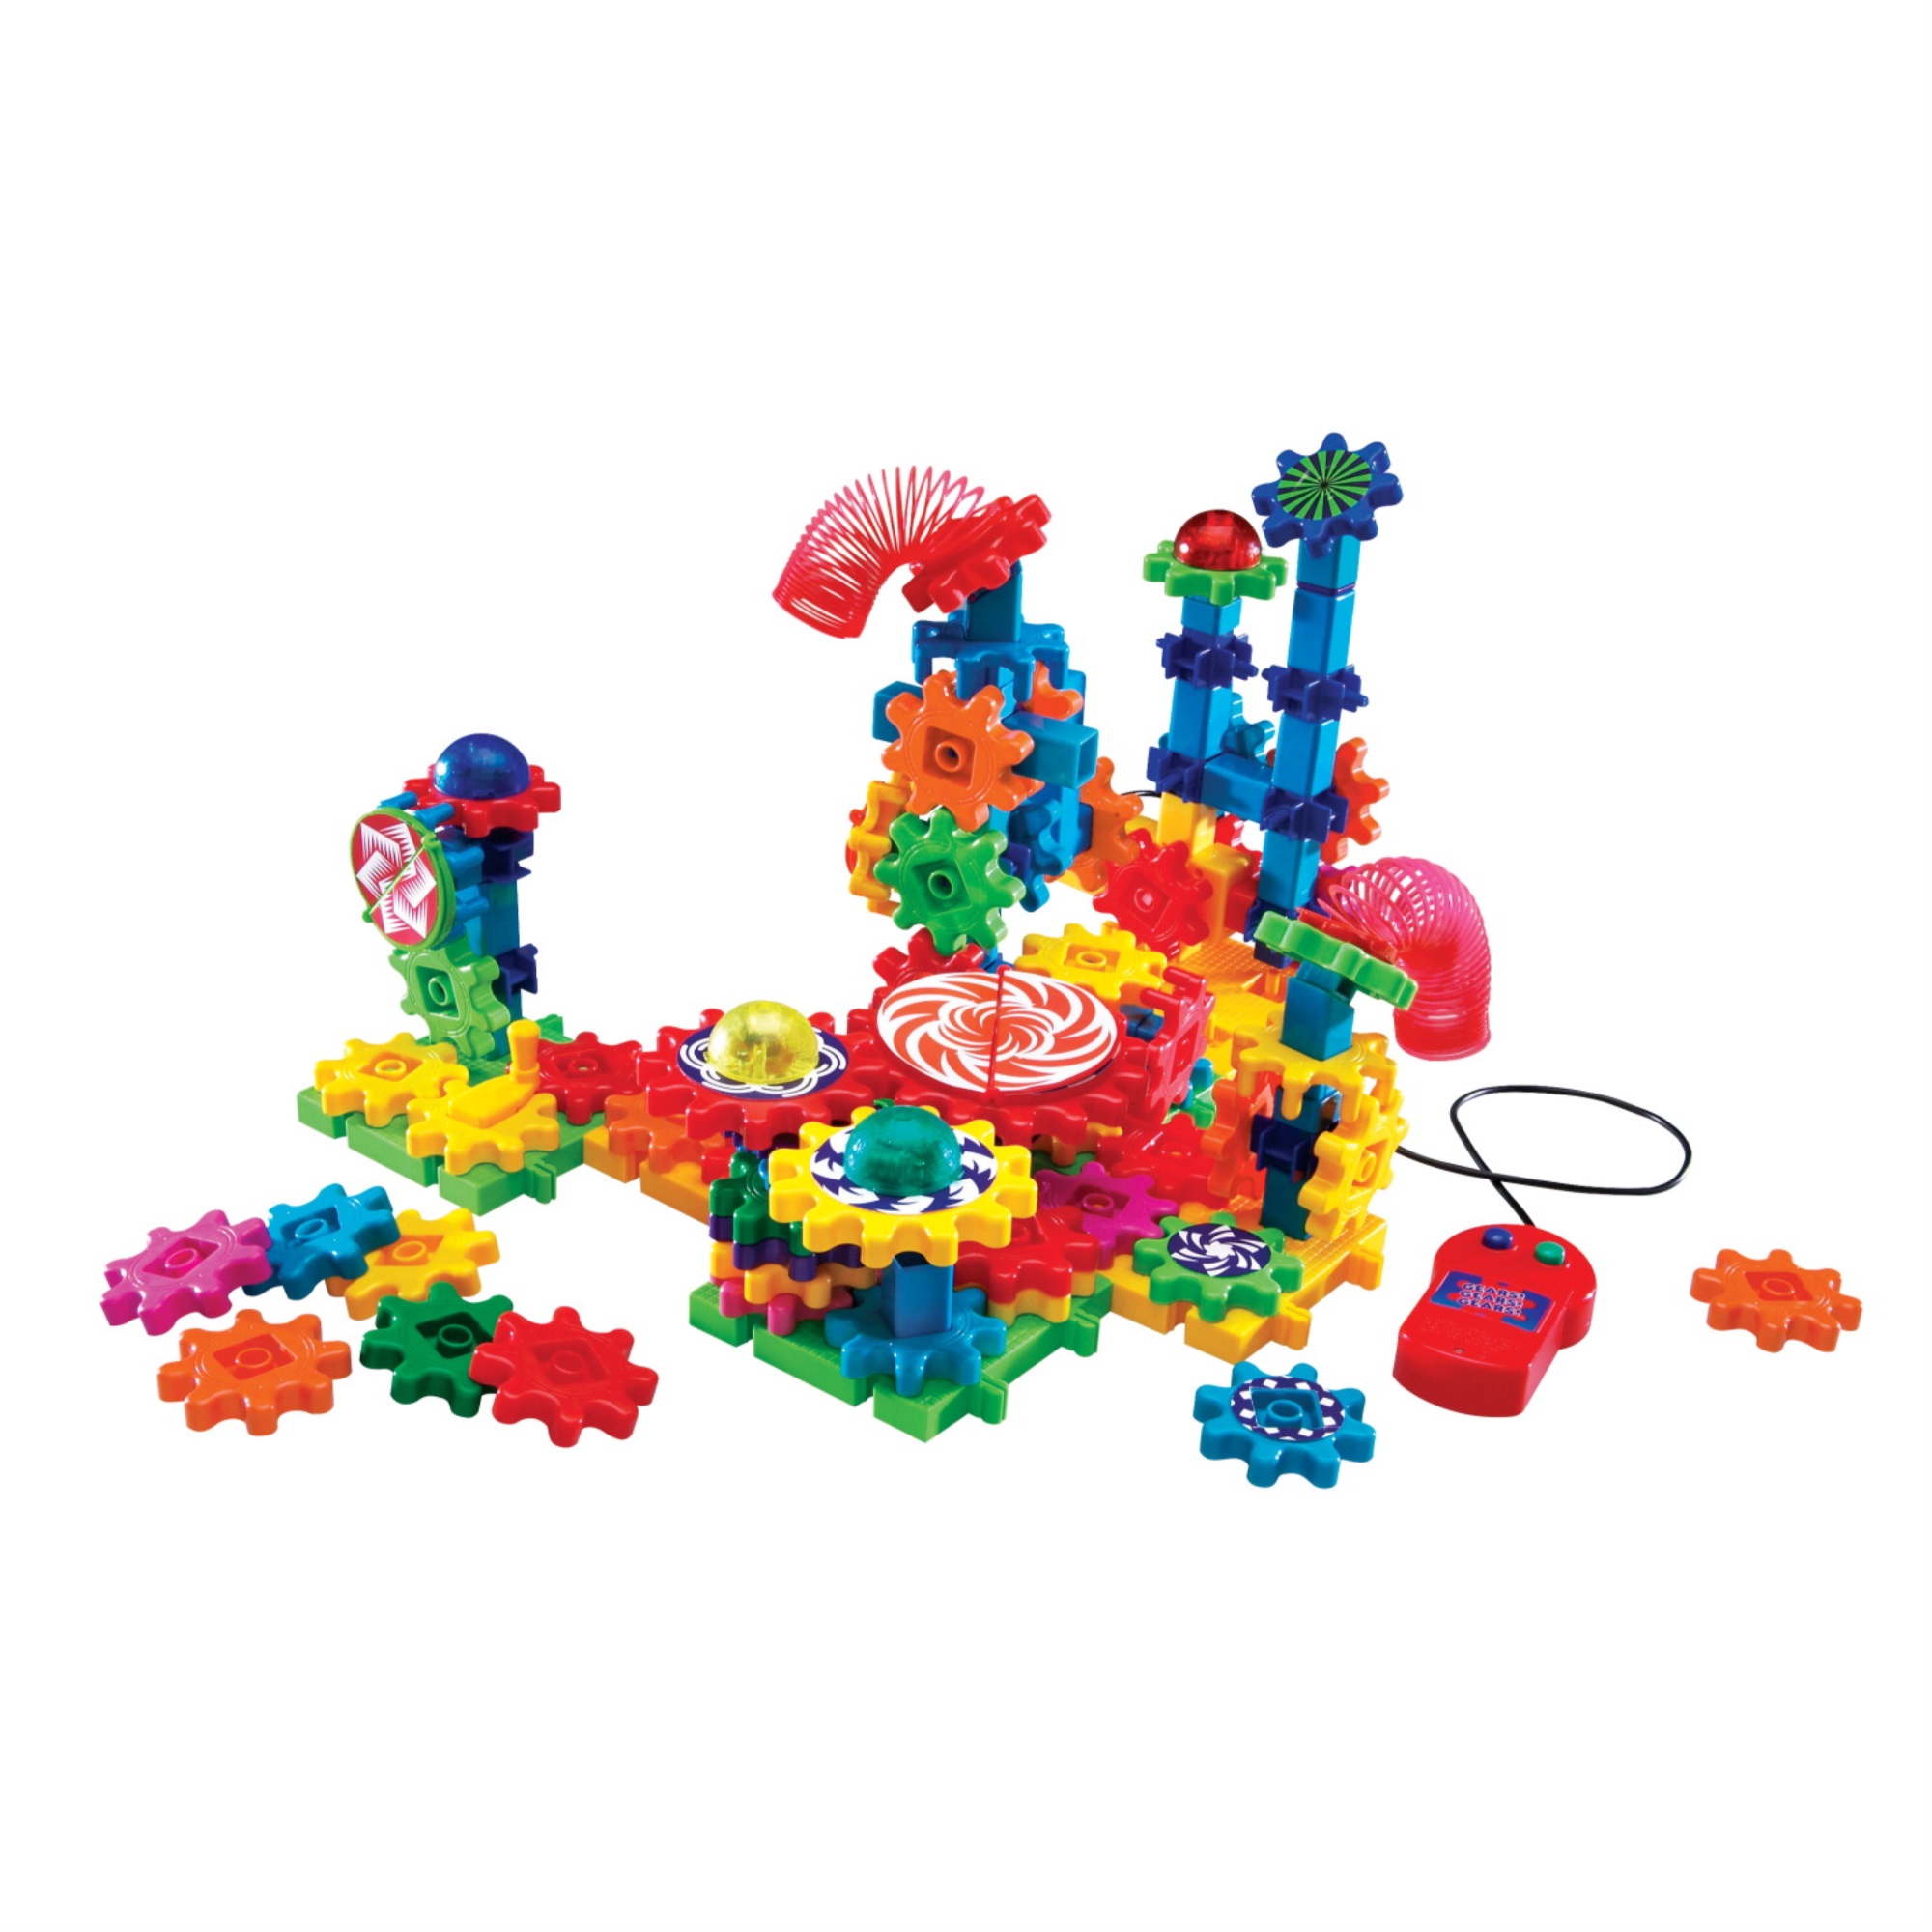 Gears Gears Gears Gears!Gears!Gears! Lights & Action Building Set - Early Skill Development - 121 Pieces